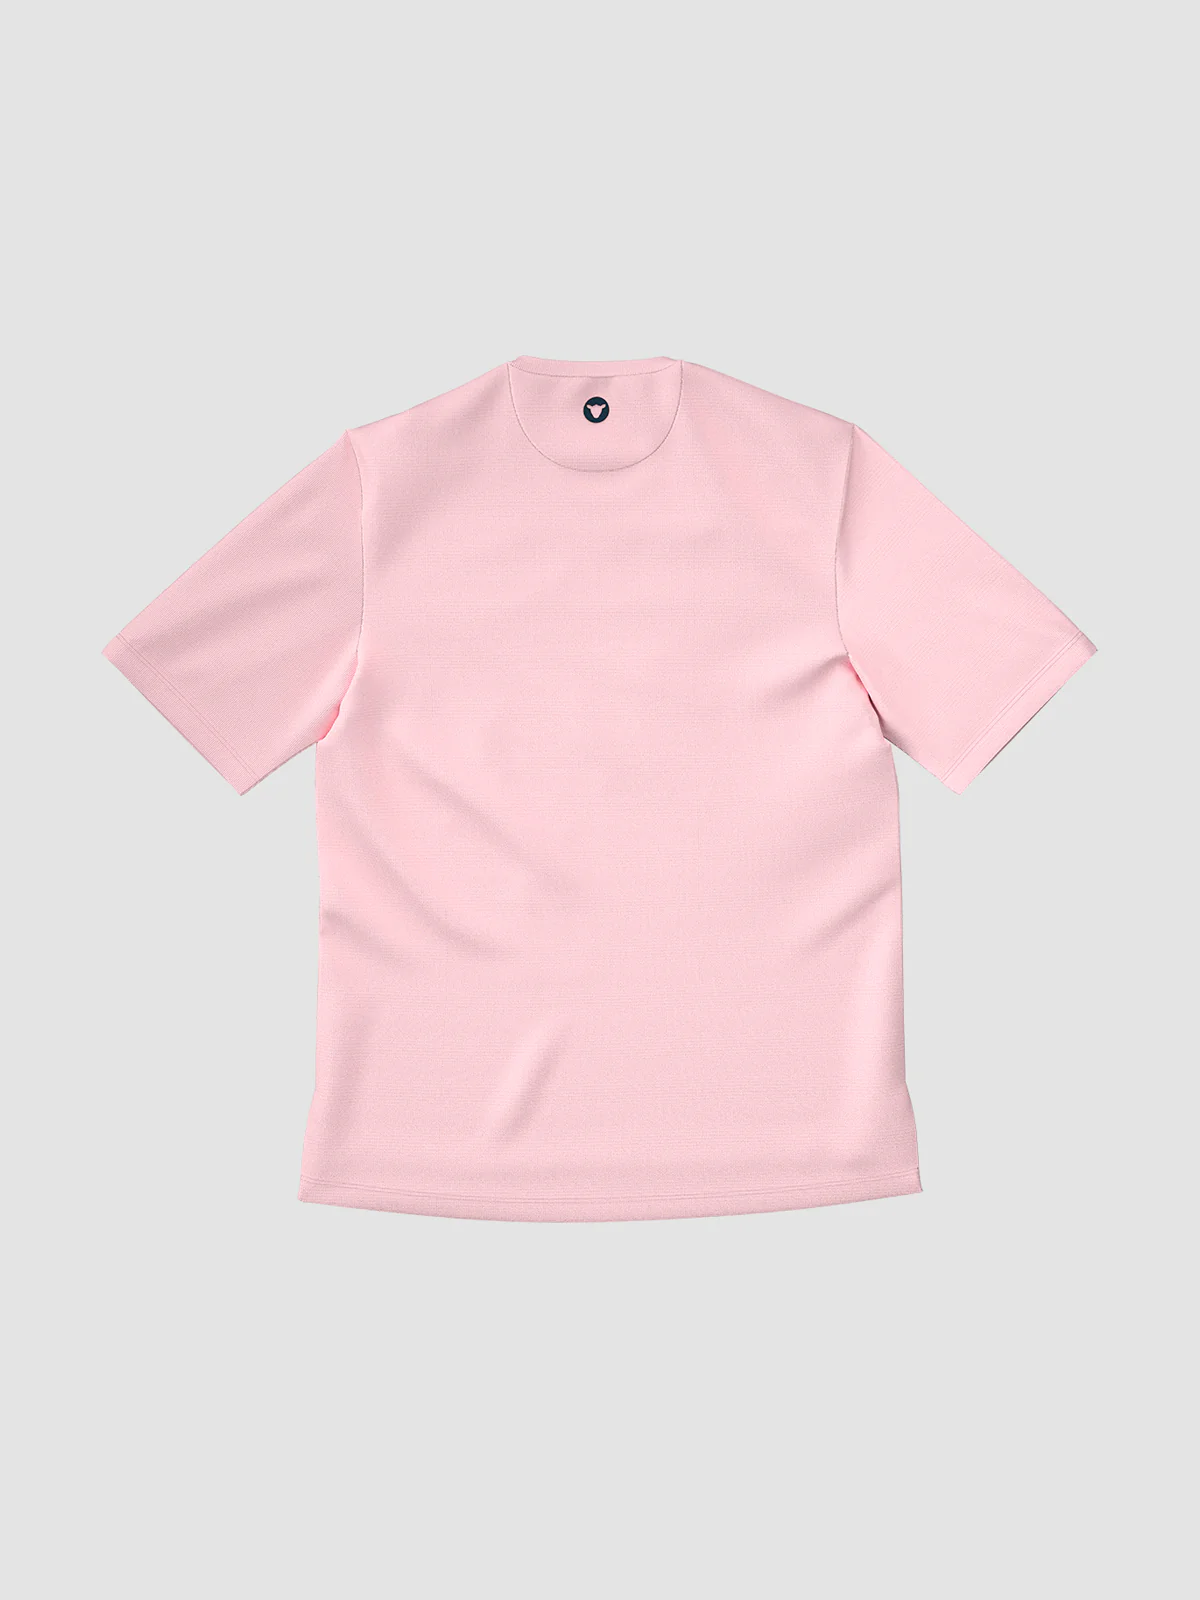 Men's Dry SS Tee - Barely Pink